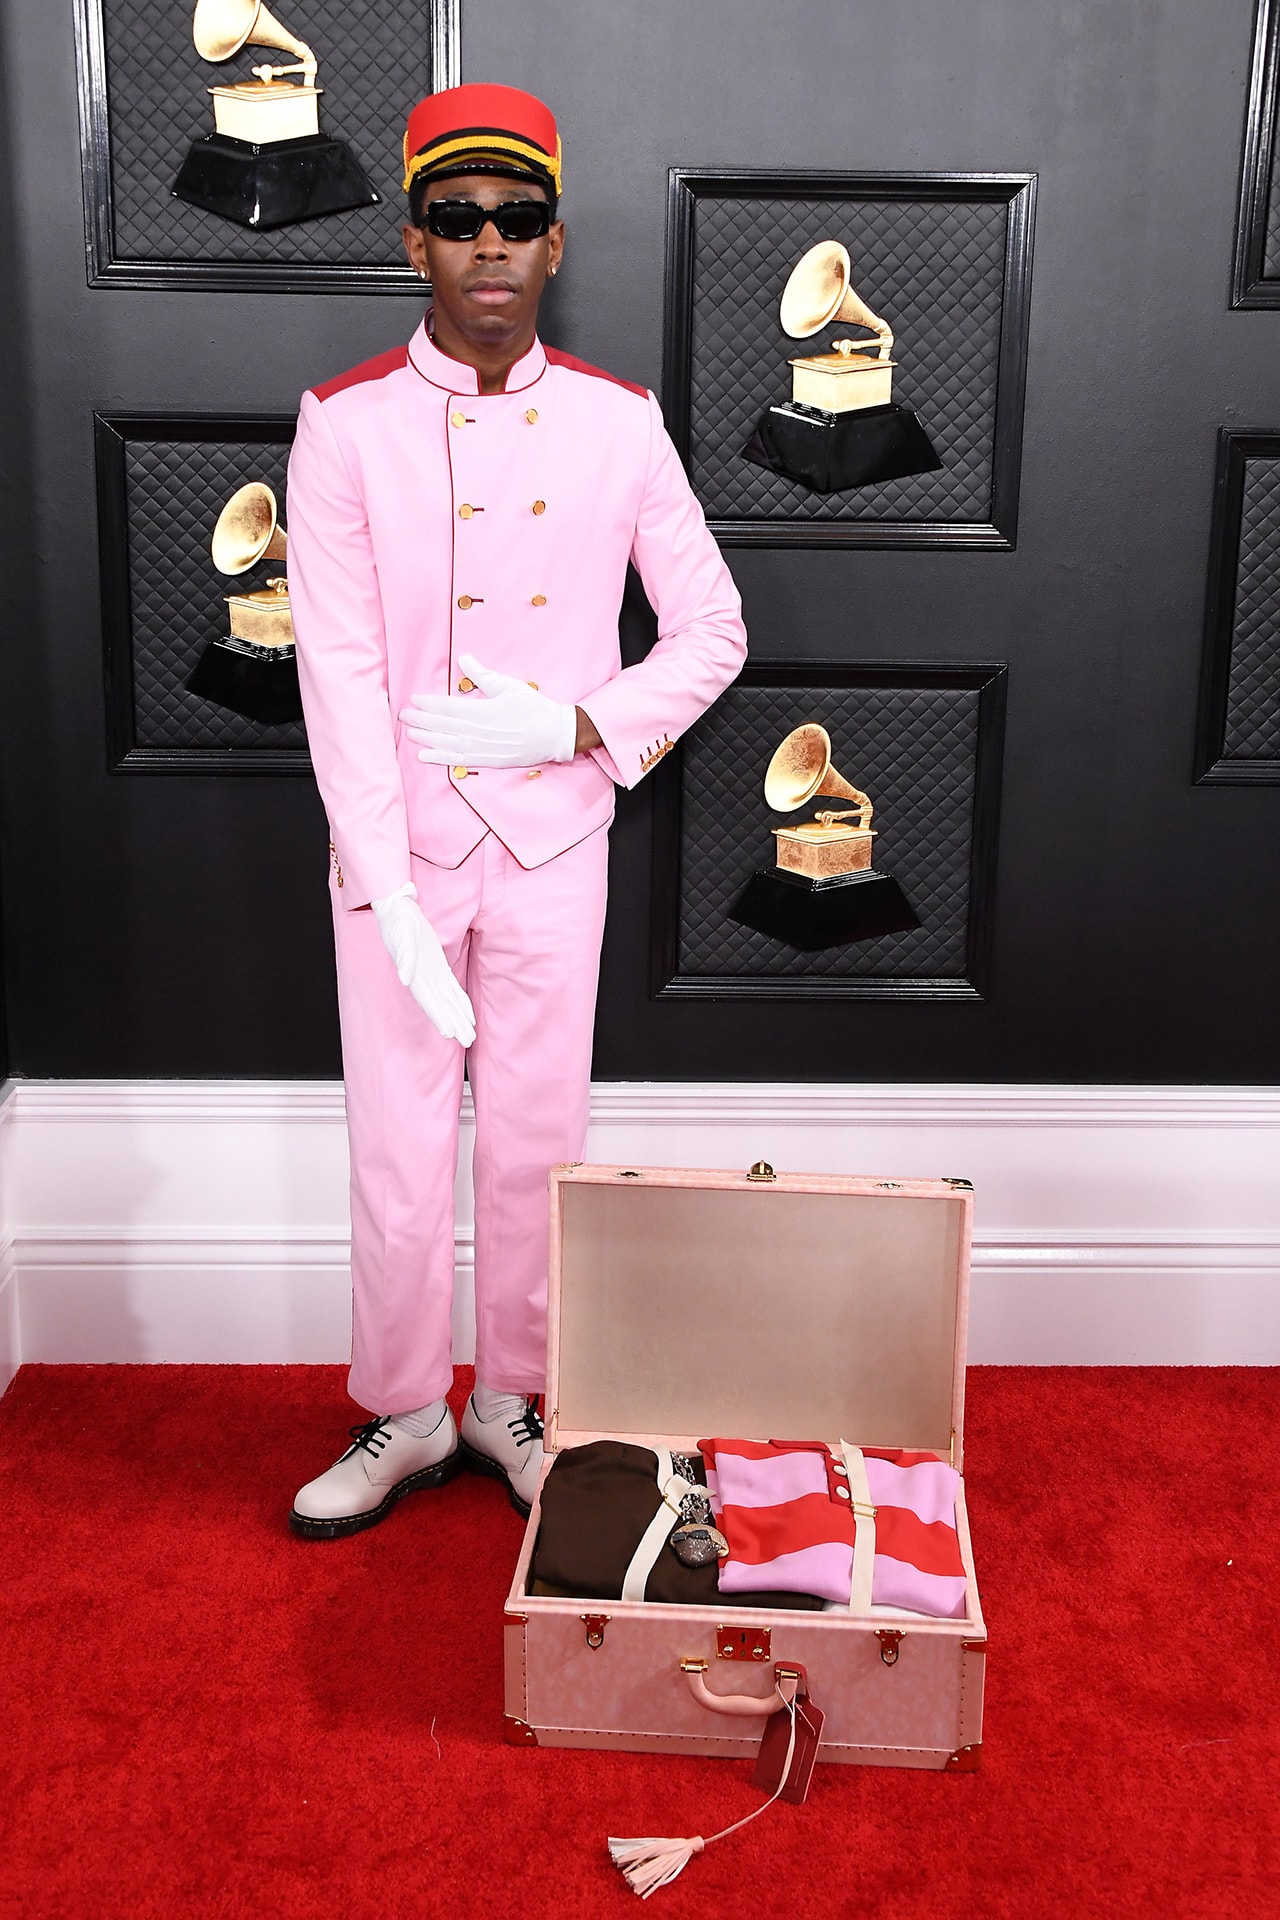 Tyler the Creator Bellboy Hotel Suit Suitcase 62nd Grammy Awards 2020 Red Carpet